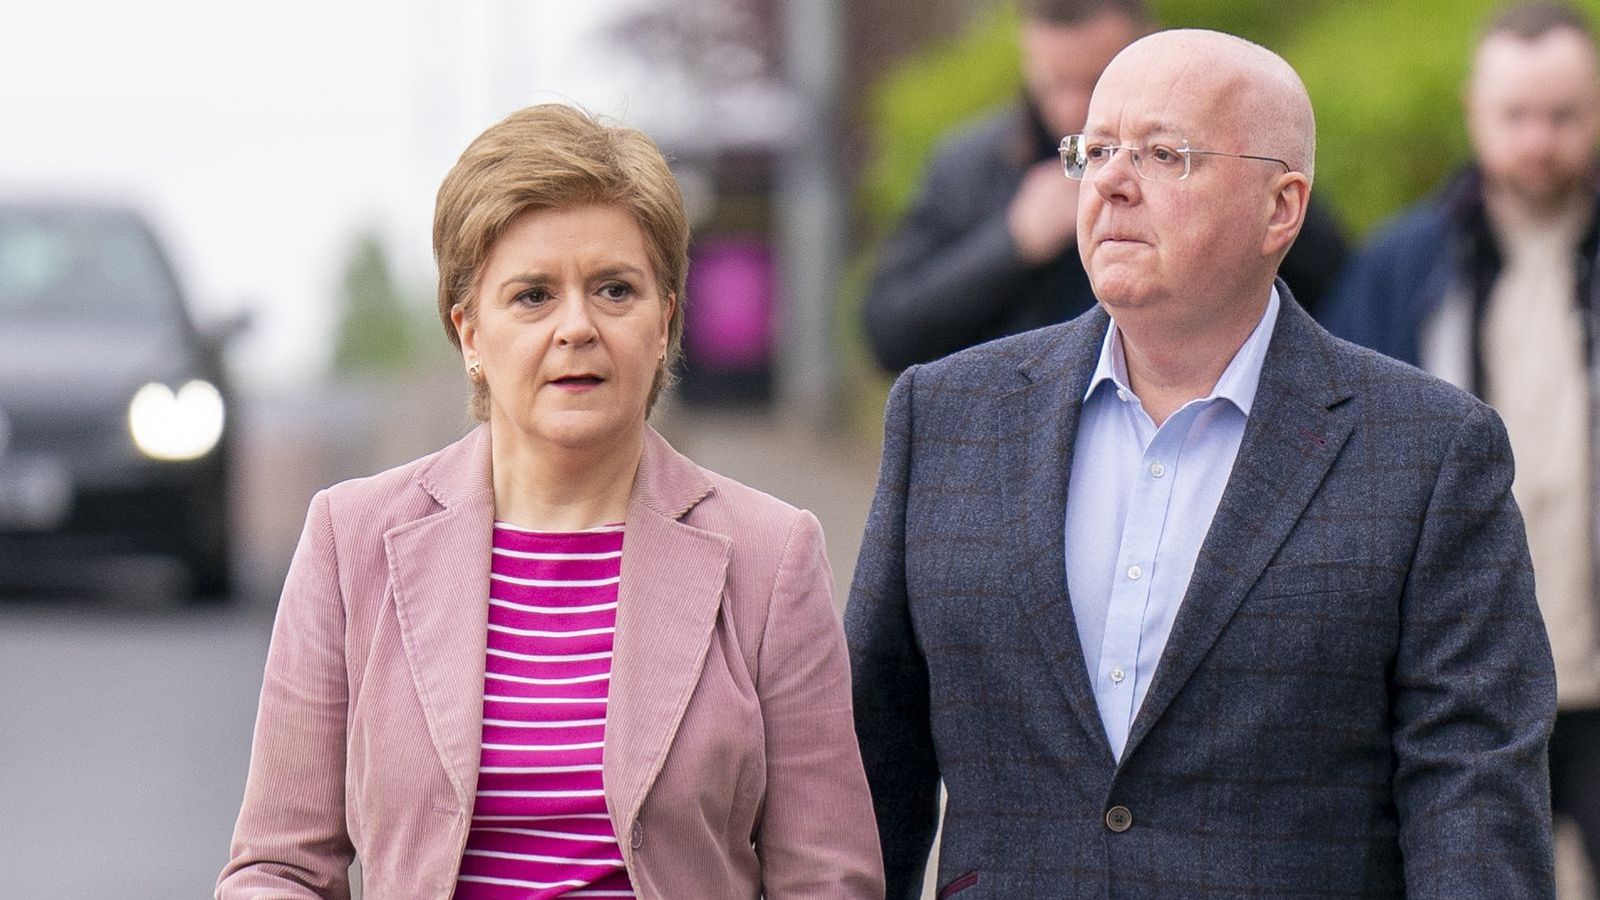 Police Scotland's chief constable: SNP finance probe heading to prosecutors 'within weeks'